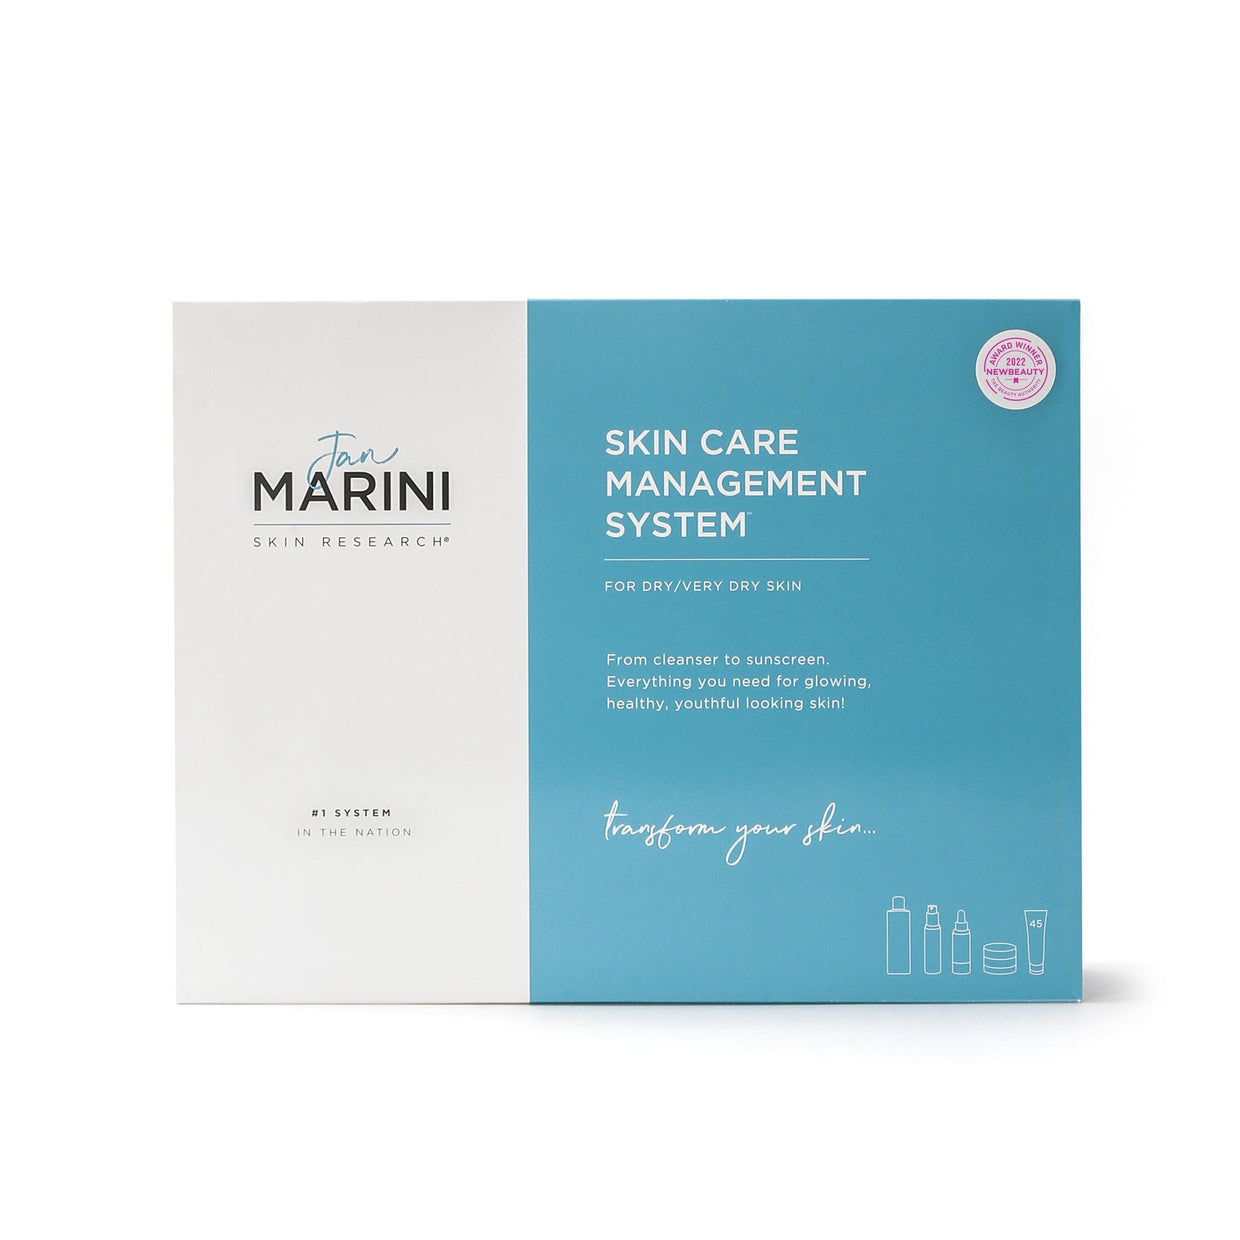 Jan Marini Skin Care Management System - Dry/Very Dry Skin with Marini Physical Protectant Untinted SPF 30 Anti-Aging Skin Care Kits Jan Marini Shop at Exclusive Beauty Club